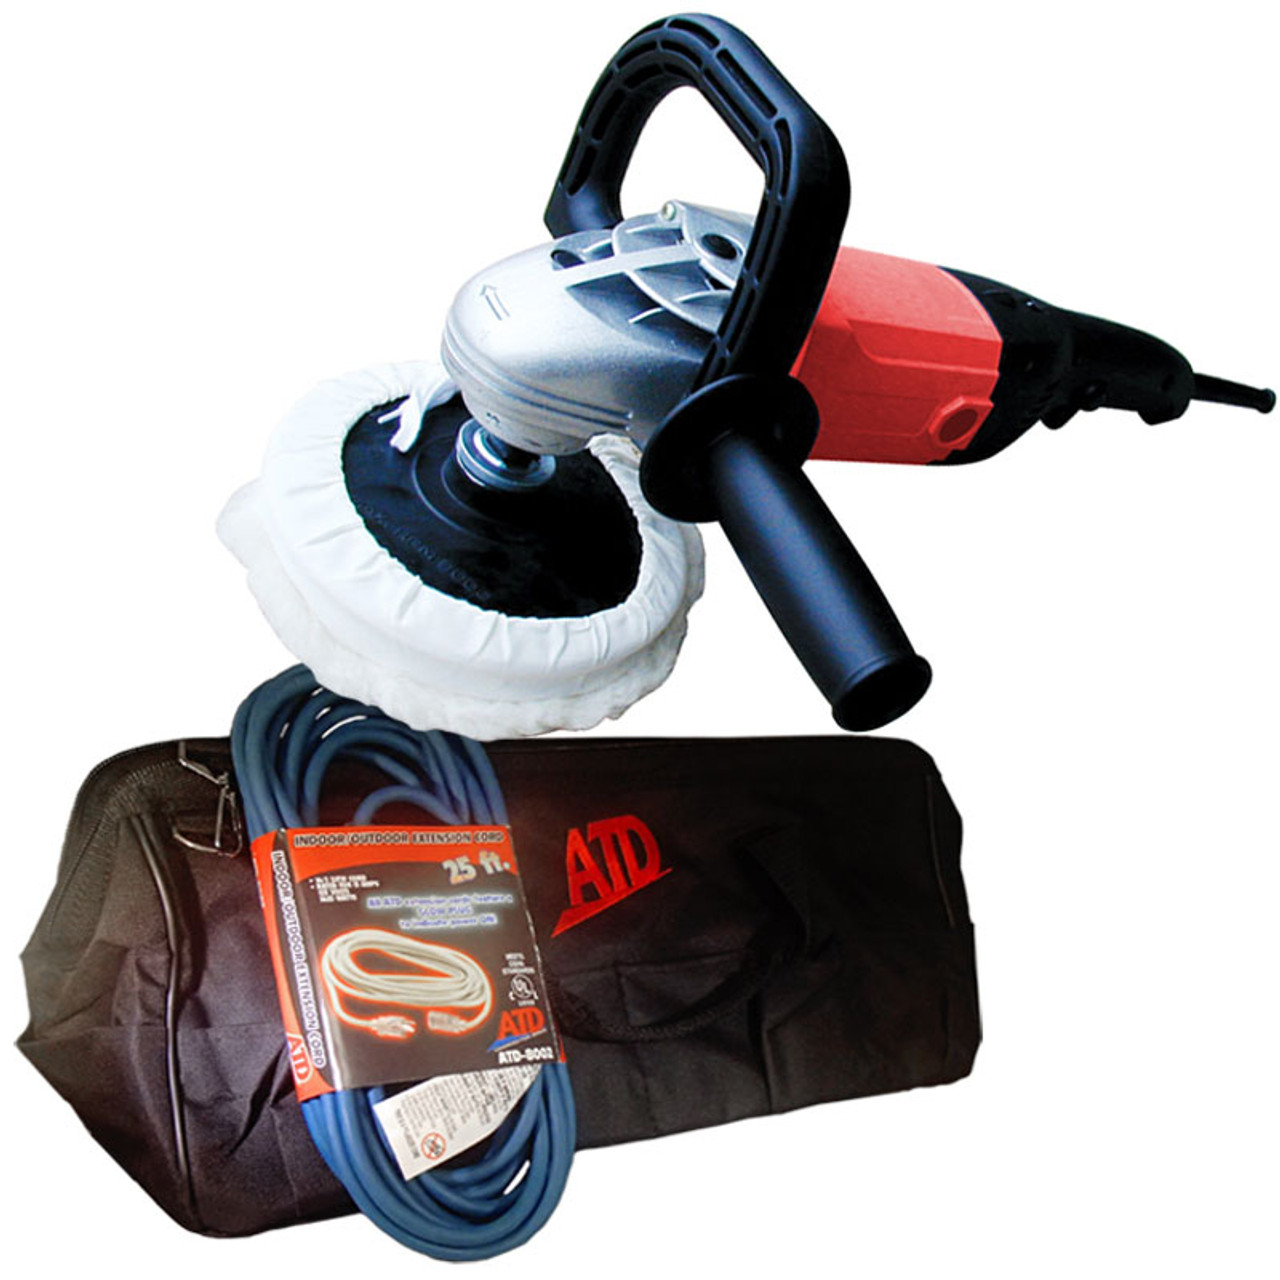 ATD Tools 10511 - 7 inch Shop Polisher